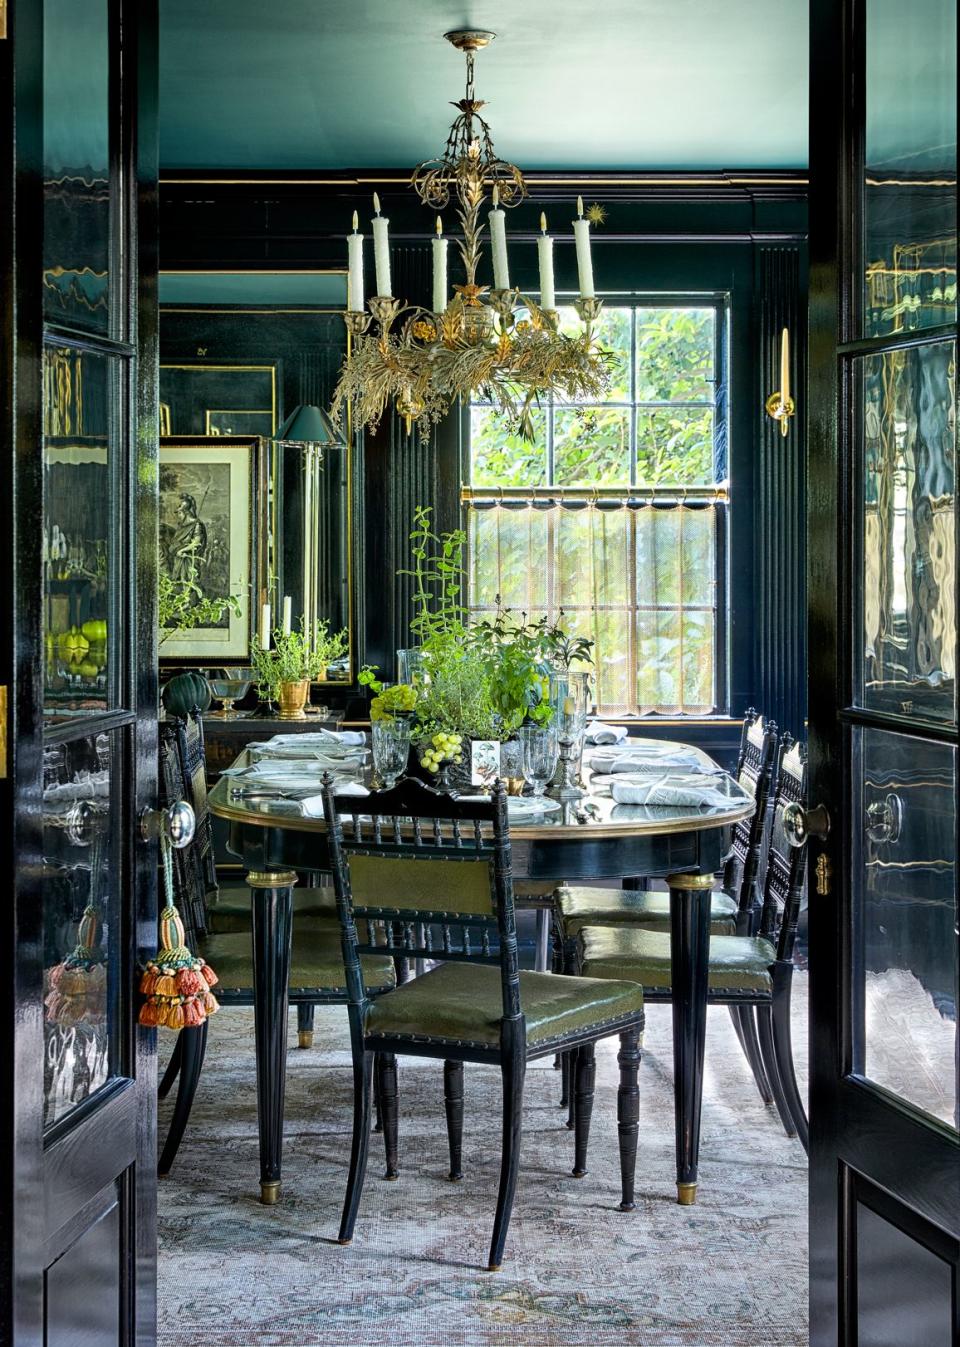 We Know You Miss Dinner Parties. Here’s Some Inspiration to Tide You Over